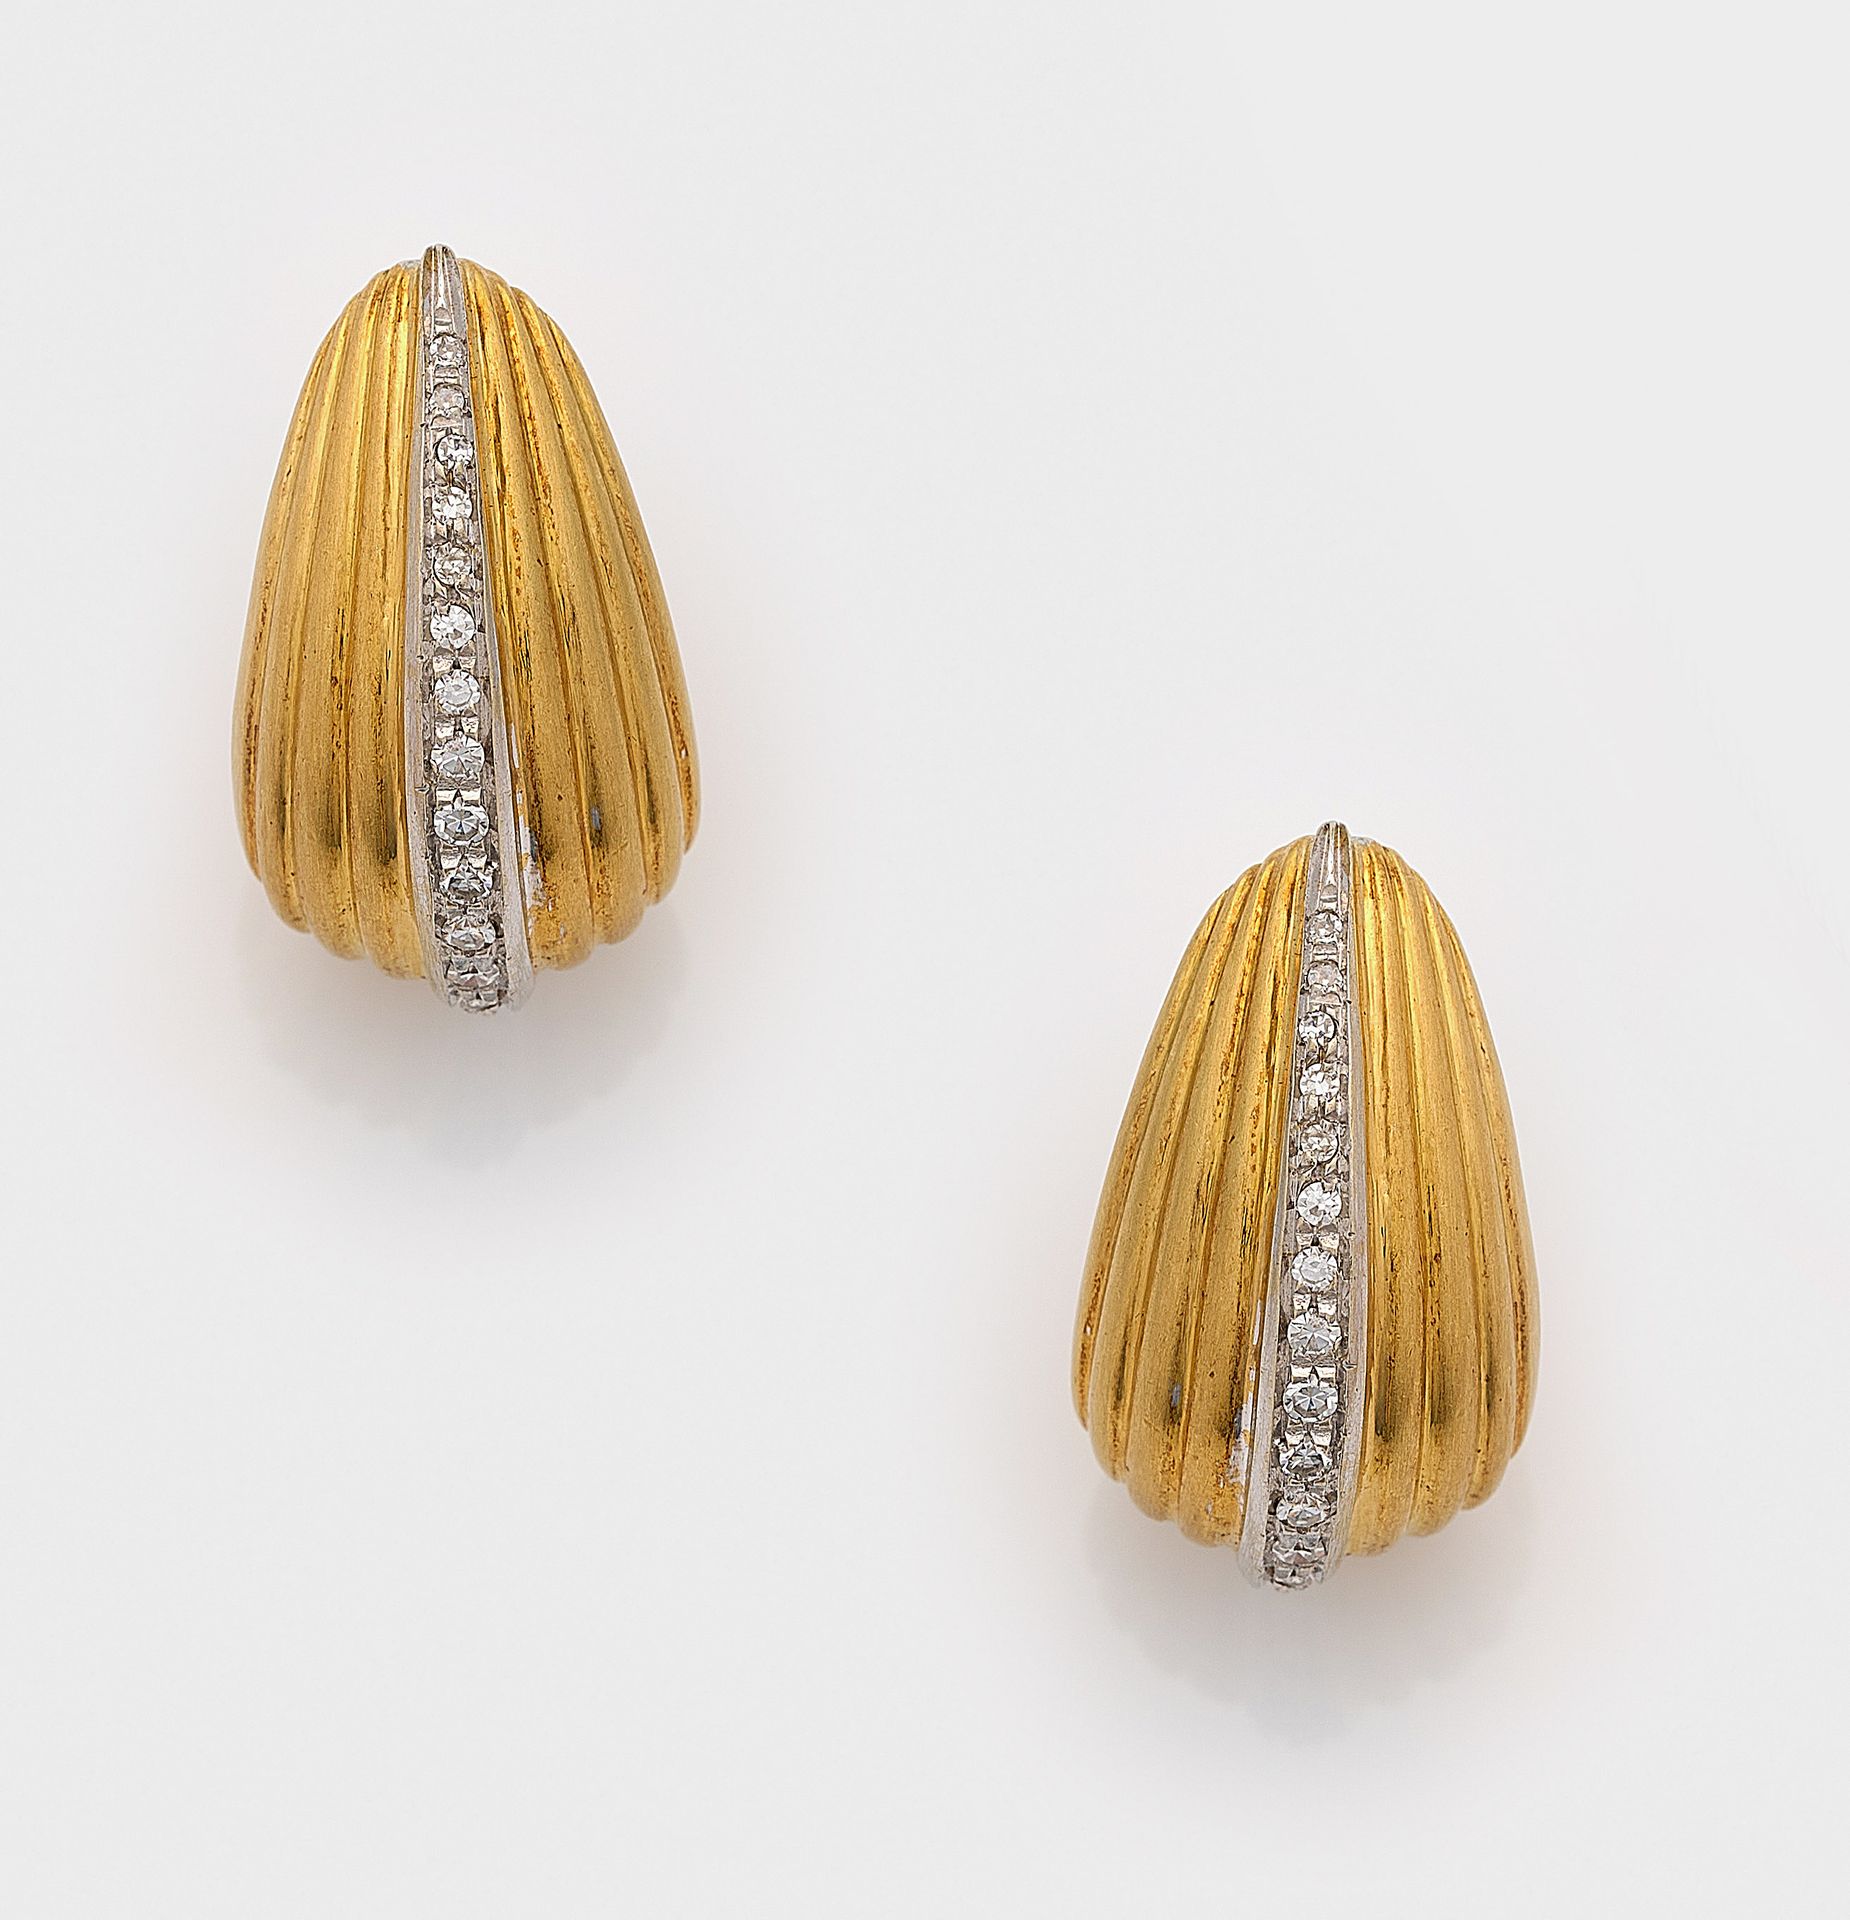 Null Pair of elegant diamond ear clips by WEMPE yellow gold, set with 8/8 diamon&hellip;